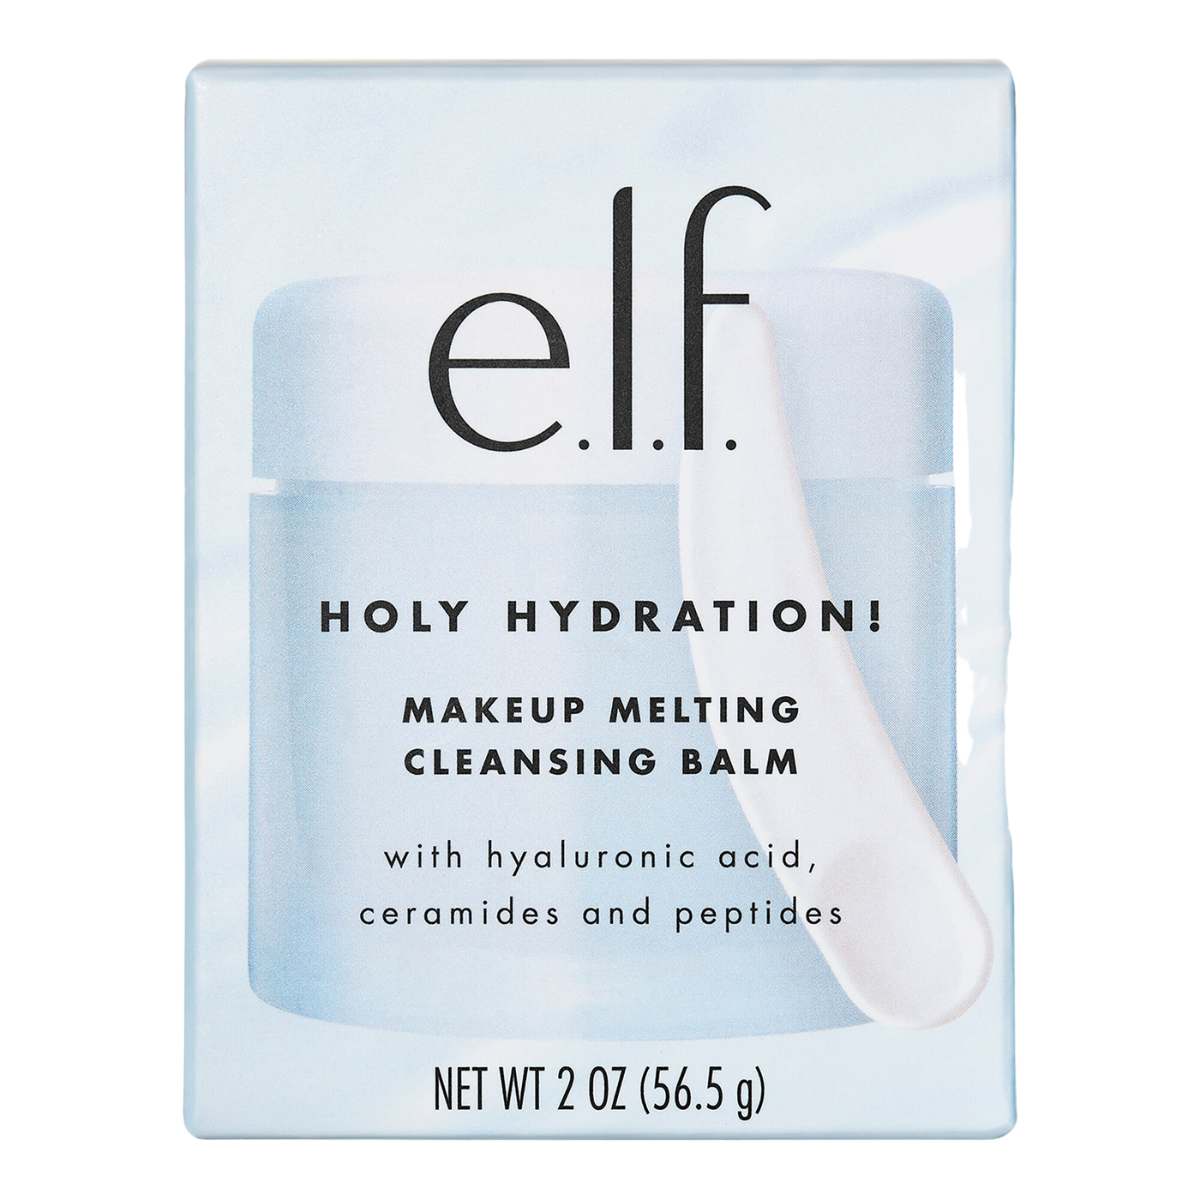 e.l.f. holy hydration makeup melting cleansing balm 